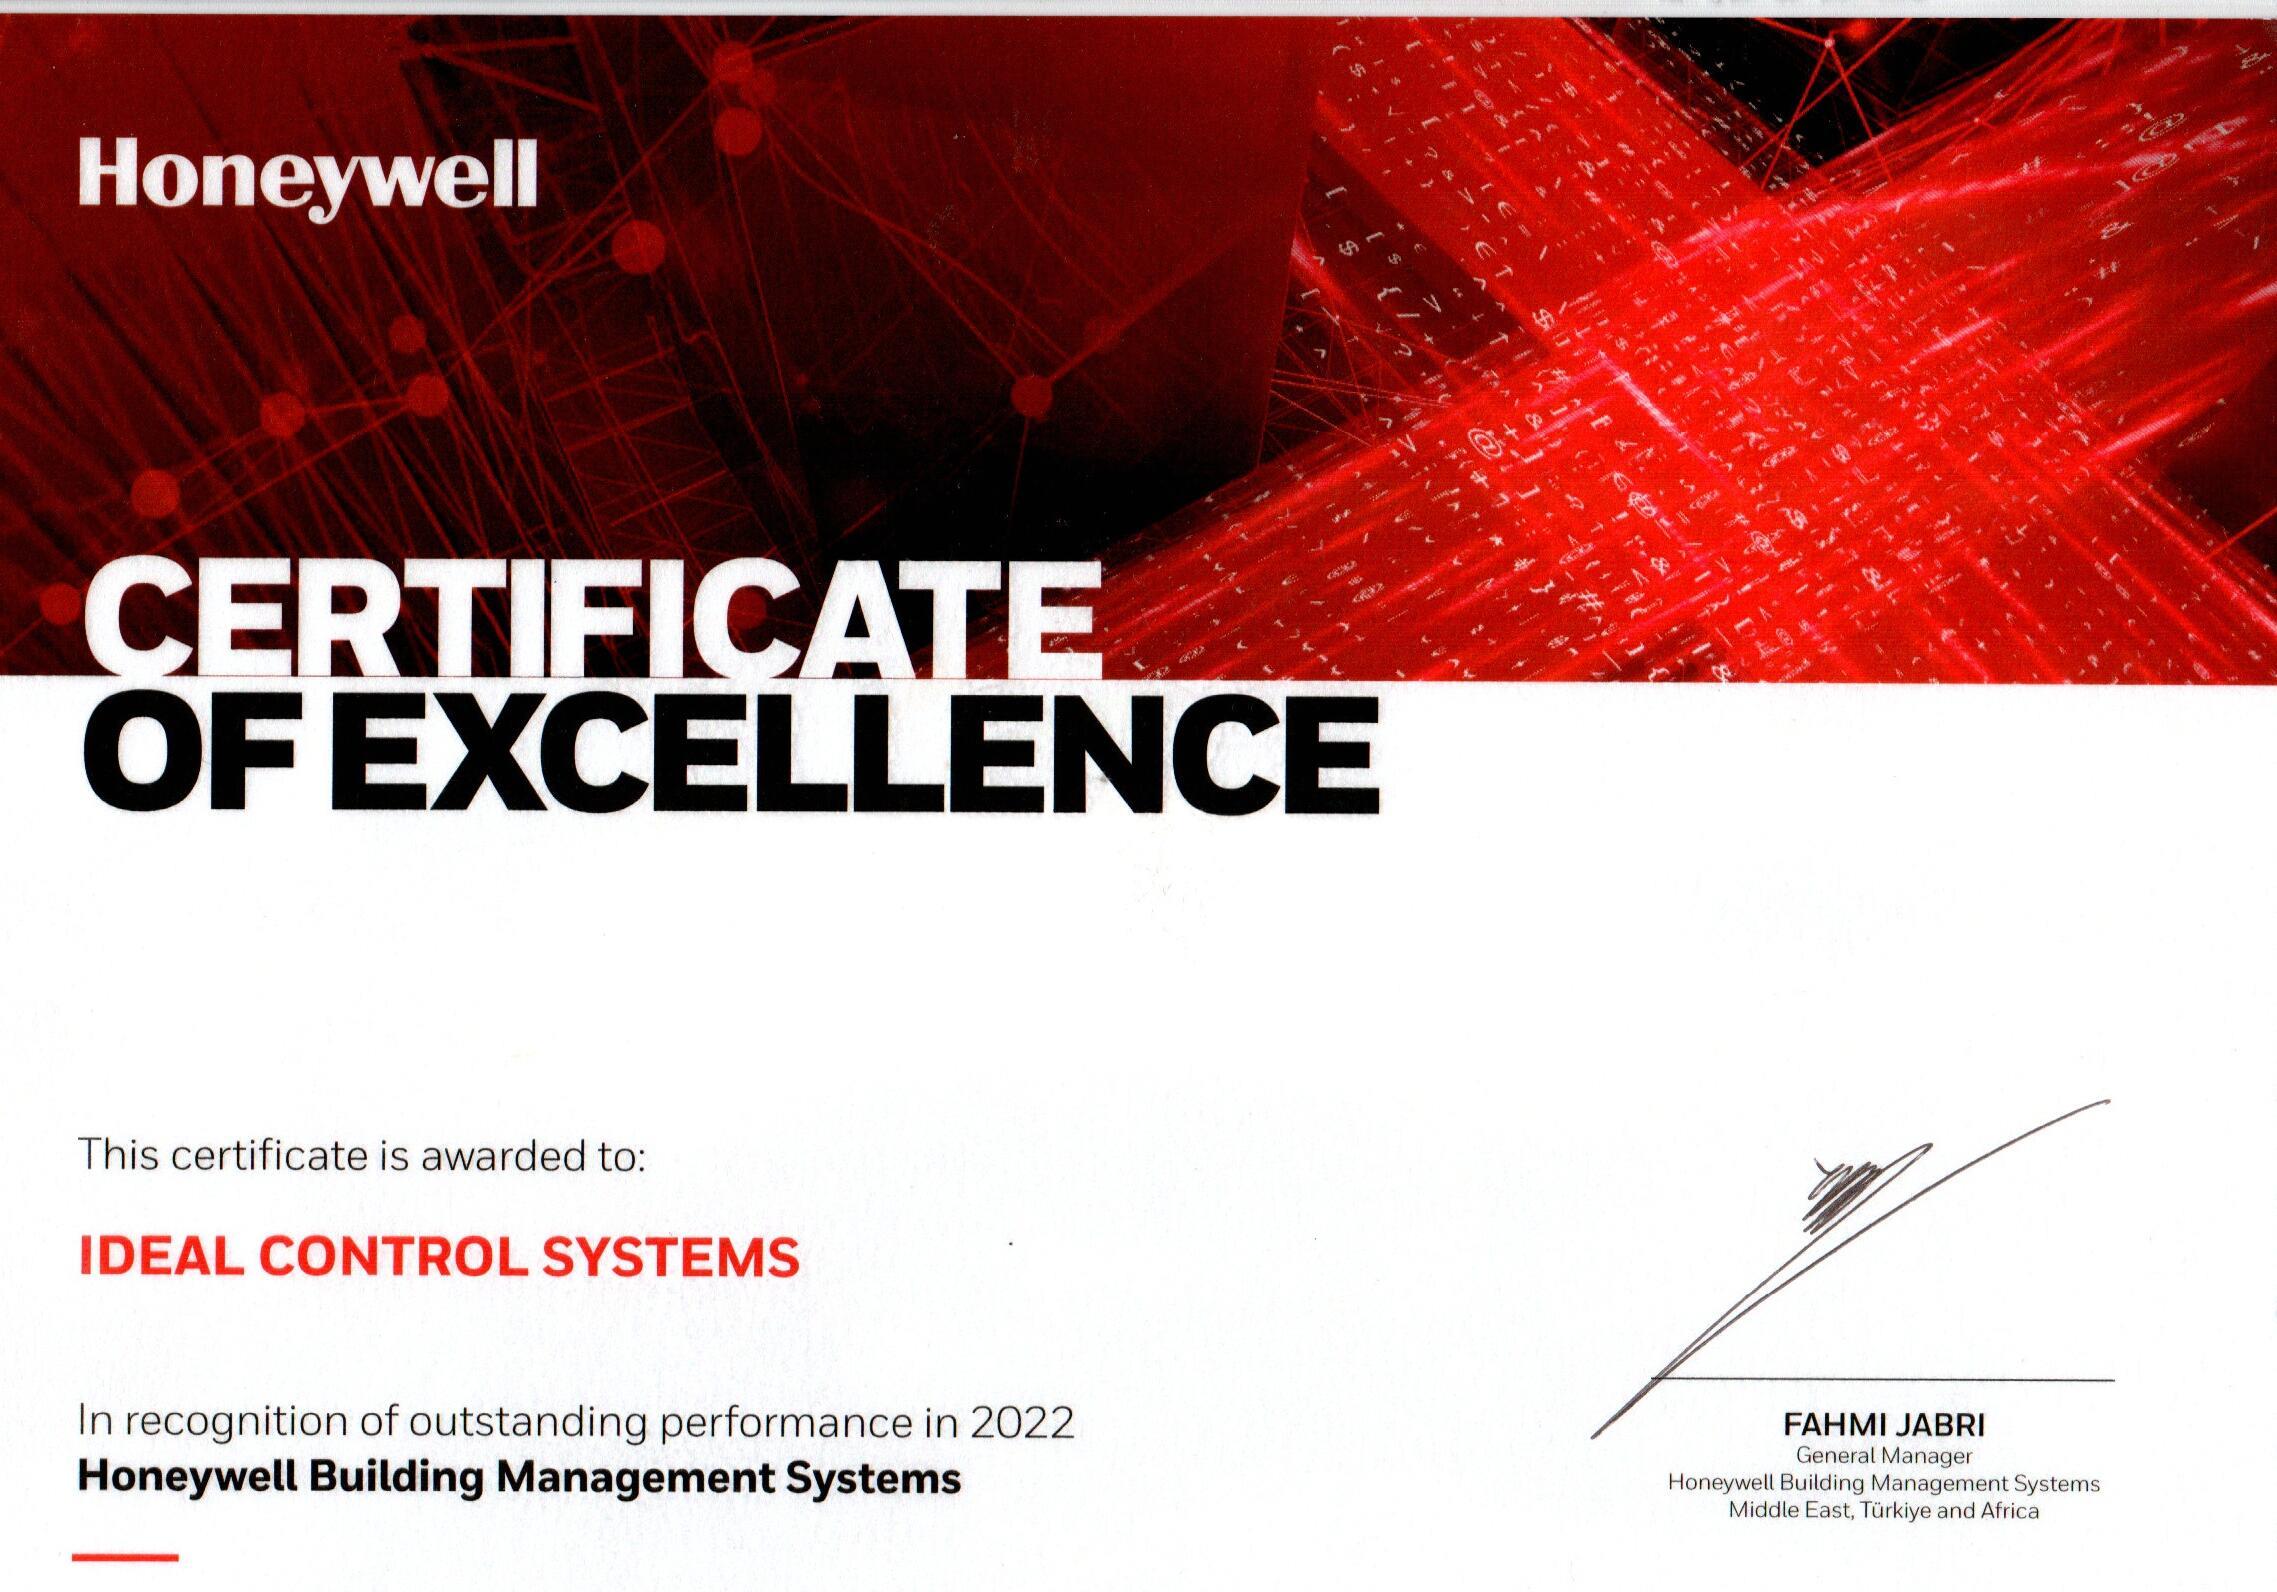 IDEAL CONTROL SYSTEM HAS BEEN AWARDED CERTIFICATE